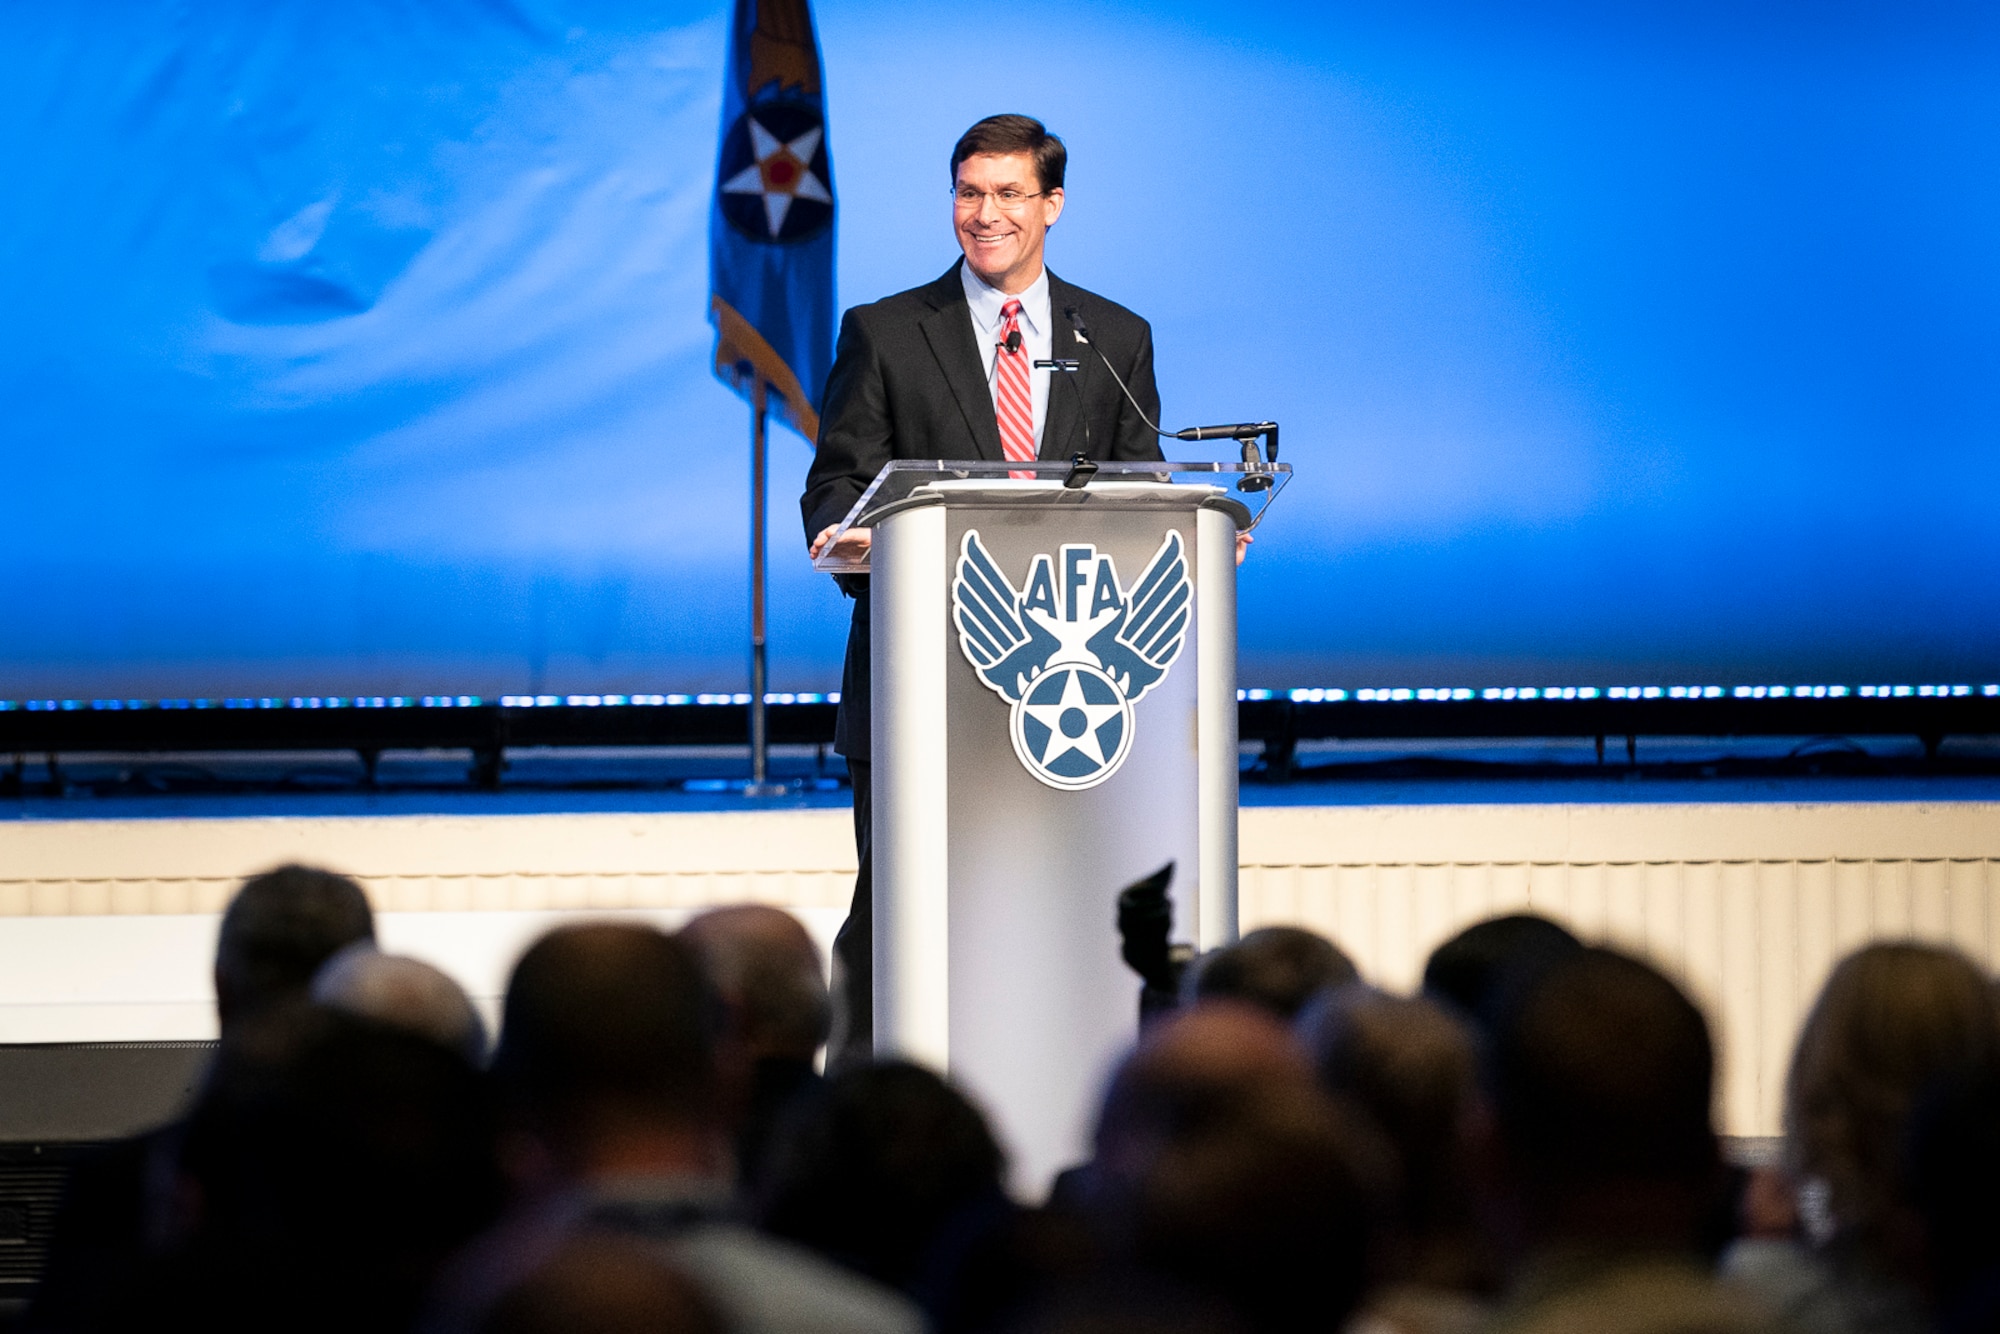 Secretary of Defense Mark T. Esper delivers a speech during the Air Force Association’s Air, Space and Cyber Conference in National Harbor, Md., Sept. 18, 2019. The ASC Conference is a professional development seminar that offers the opportunity for Department of Defense personnel to participate in forums, speeches and workshops. (U.S. Air Force photo by Tech. Sgt. D. Myles Cullen)